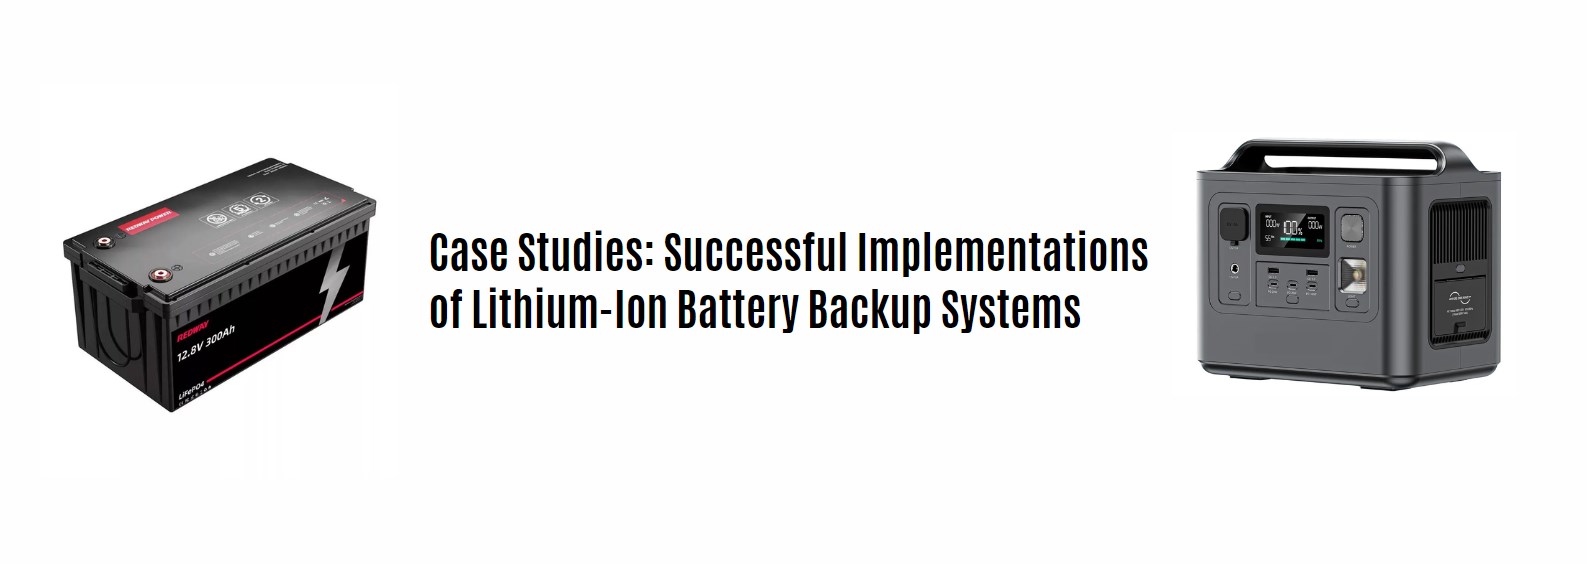 Case Studies: Successful Implementations of Lithium-Ion Battery Backup Systems. 12v 300ah lithium battery. portable power station